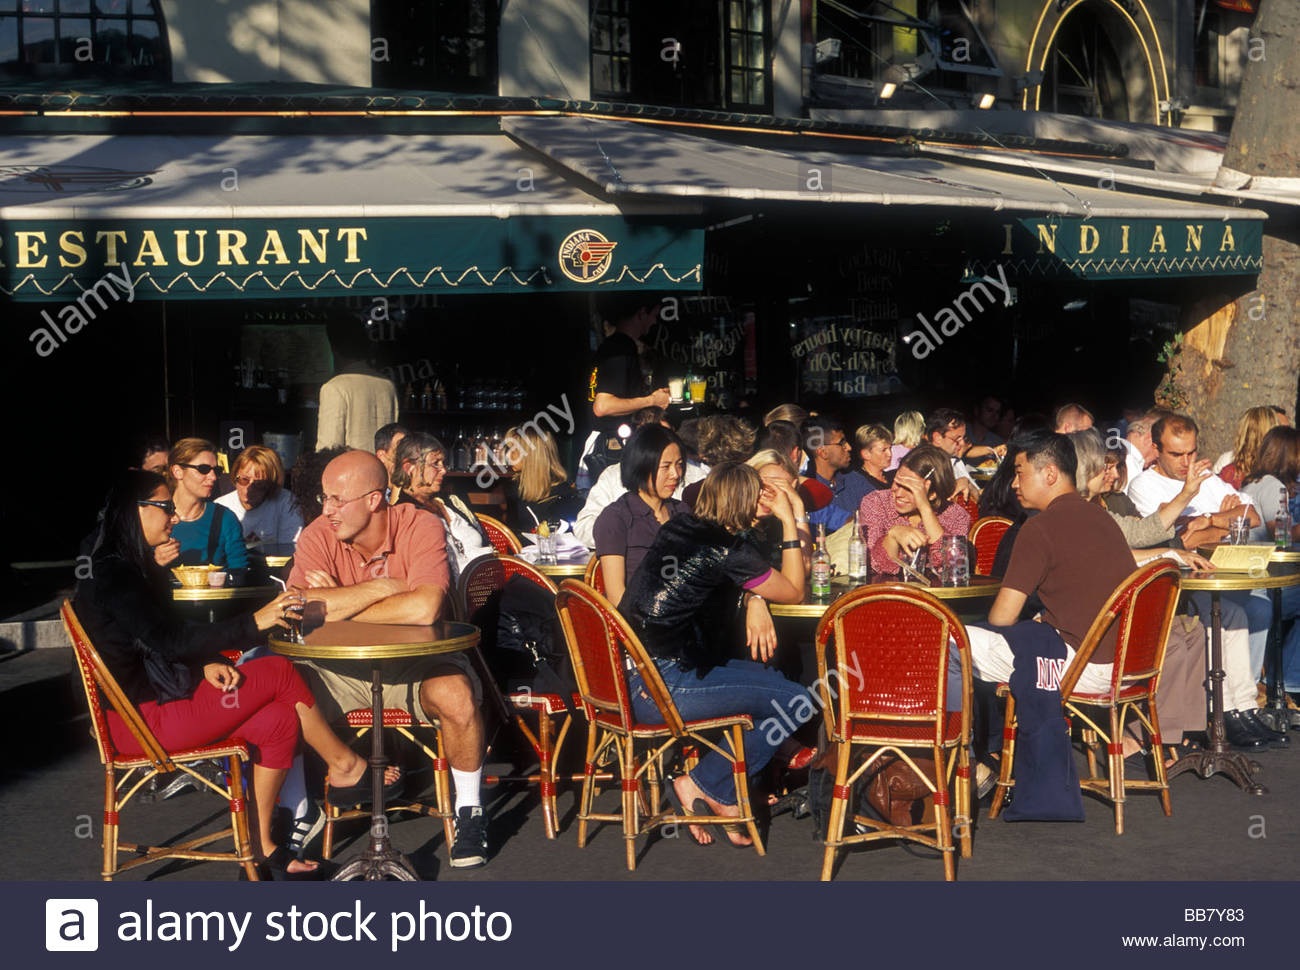 french people tourists eating indiana bastille restaurant french food BB7Y83